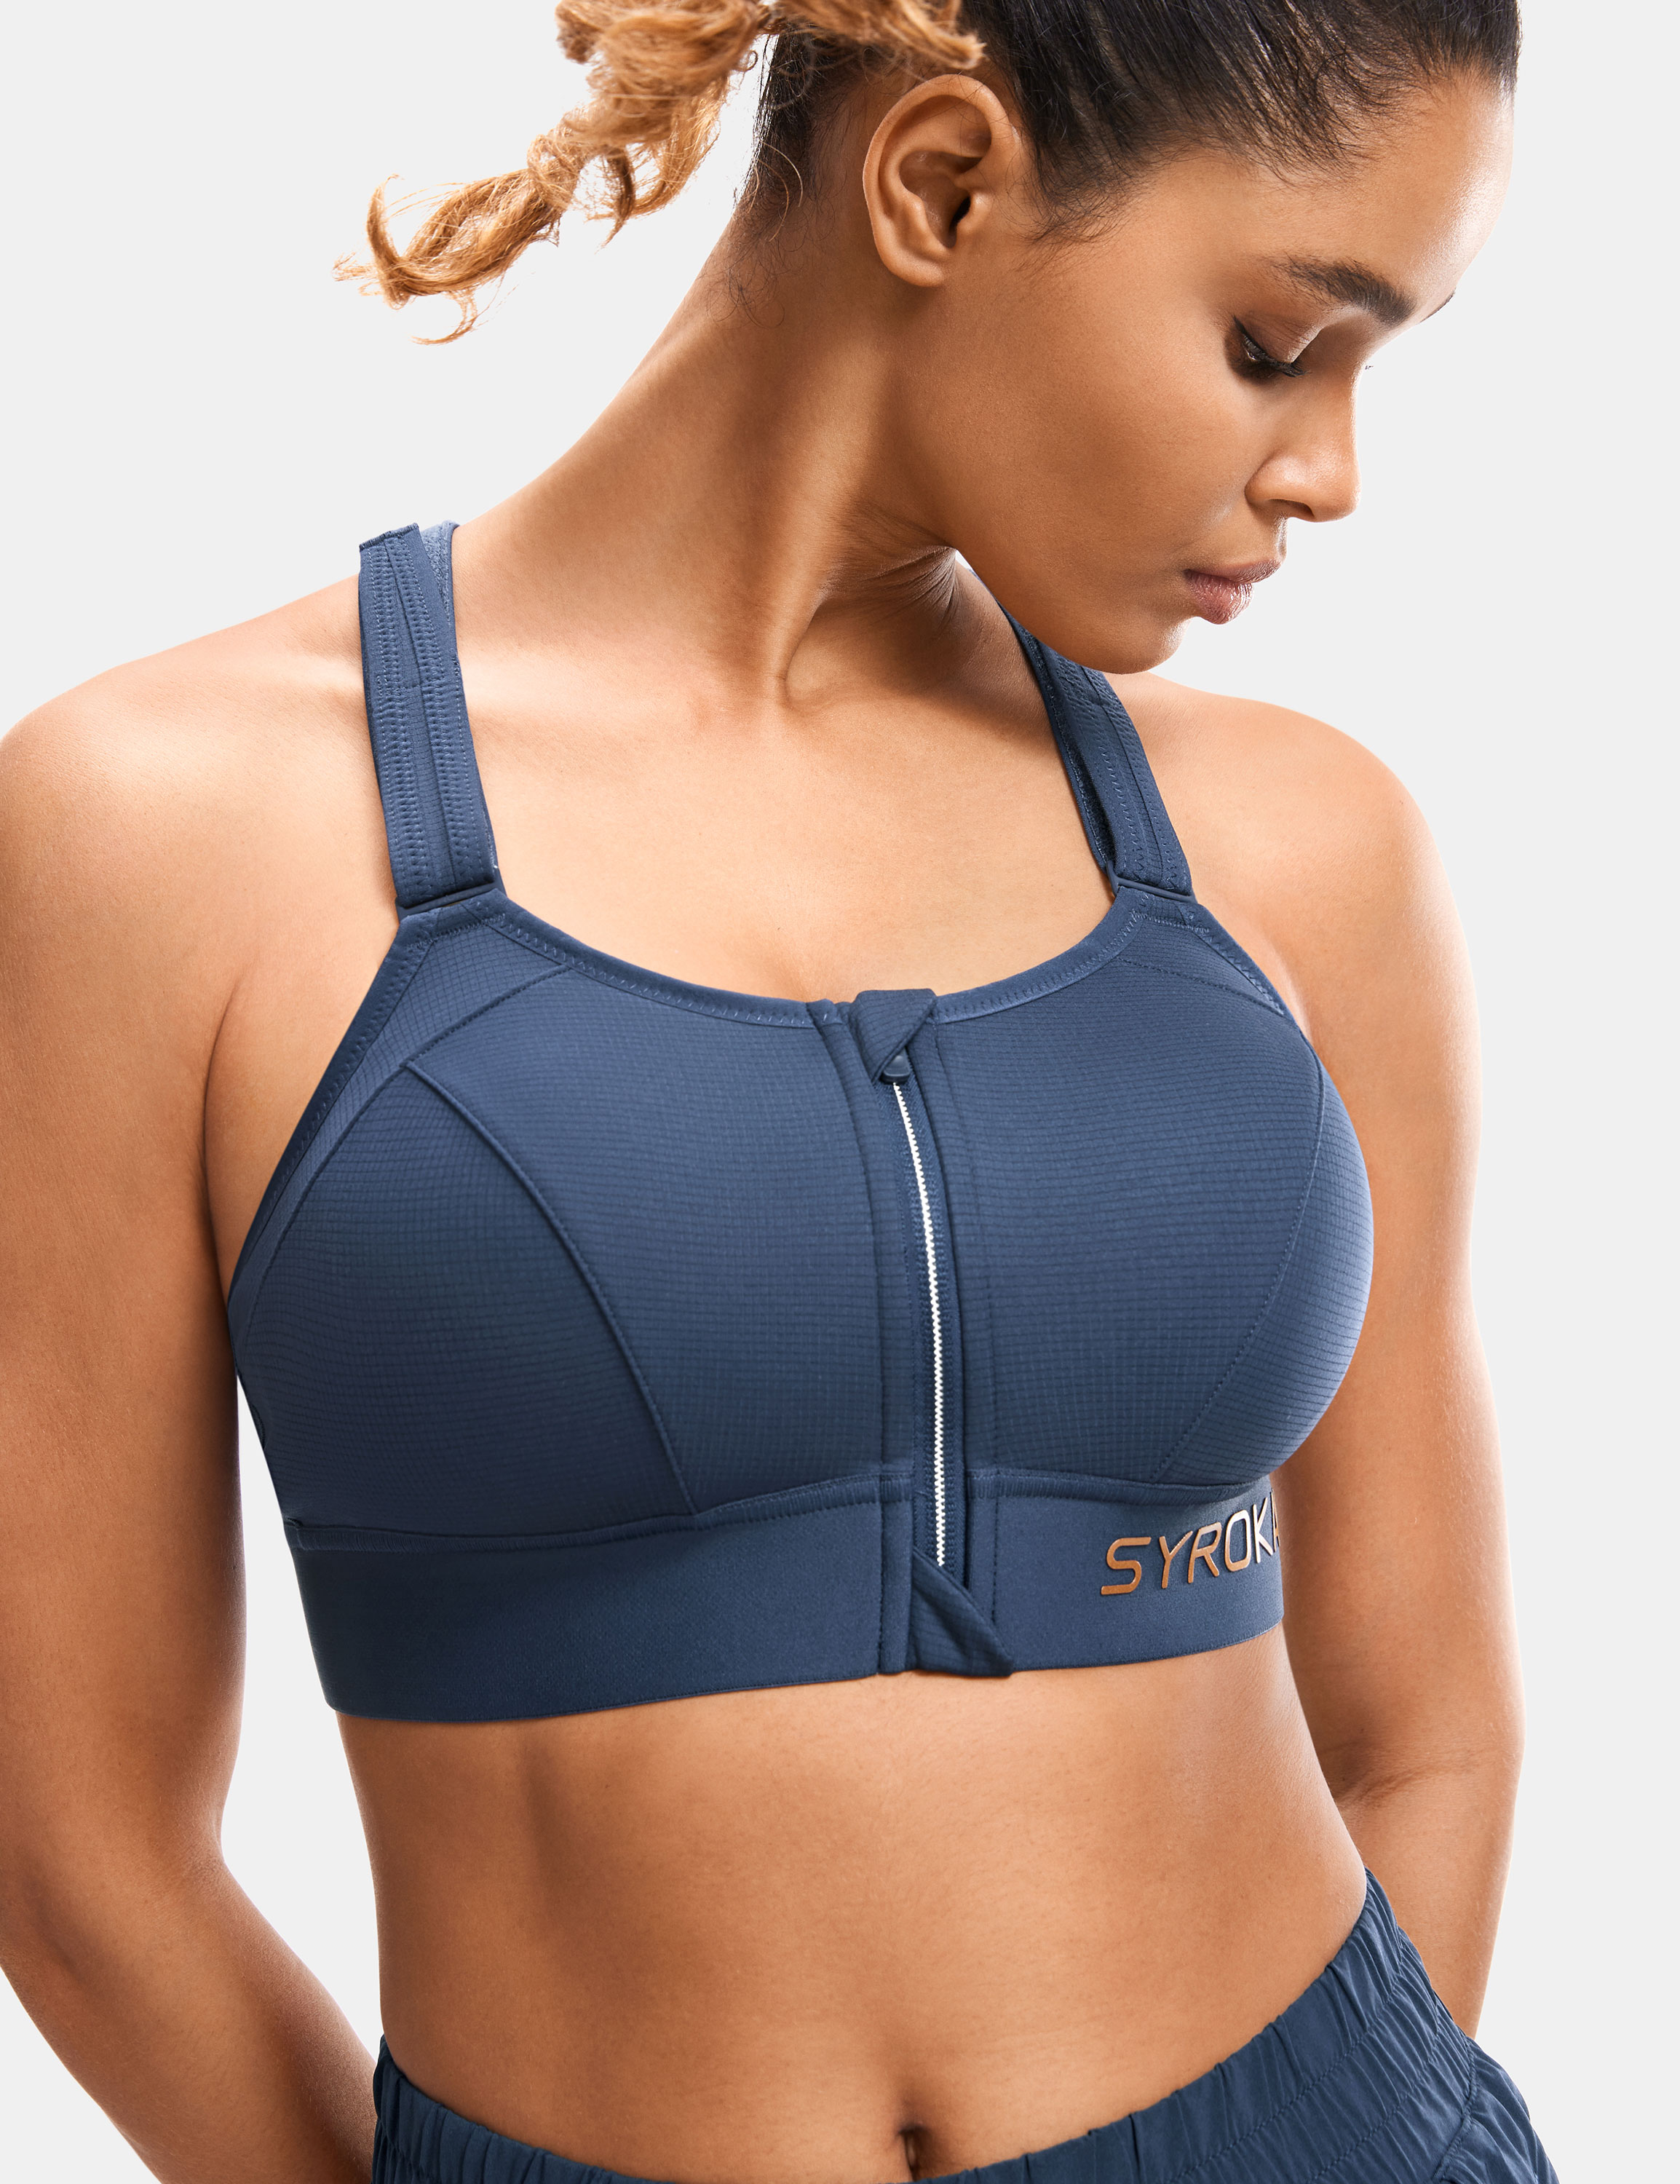 Buy SYROKAN Women's Sports Bra for Large Breasts High Impact